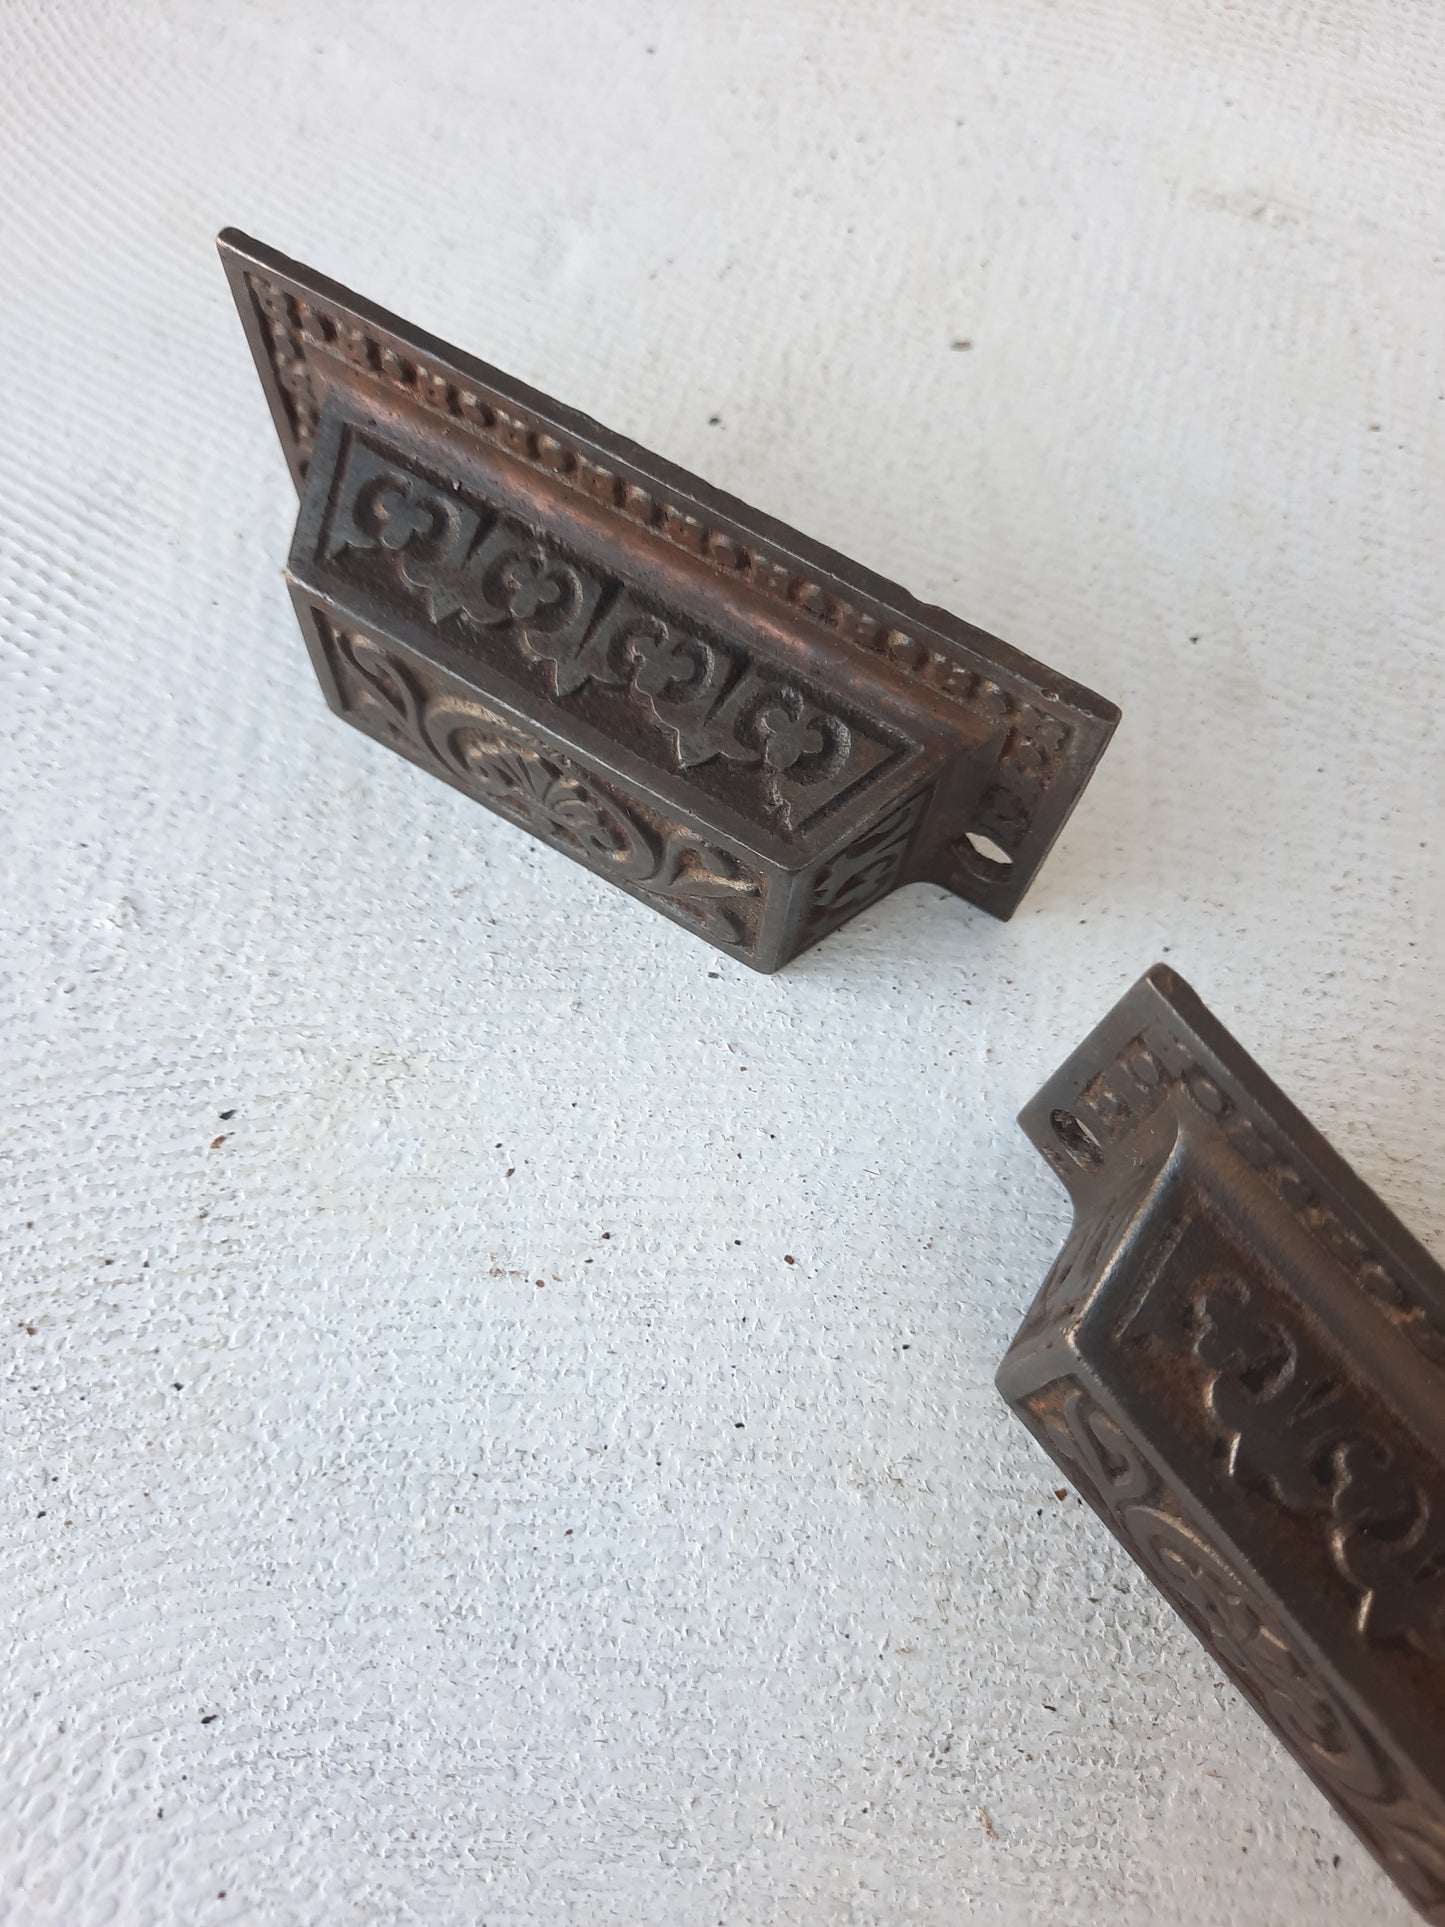 Two Eastlake Design Iron Handles or Pulls, Antique Cast Iron Apothecary Handles 101216